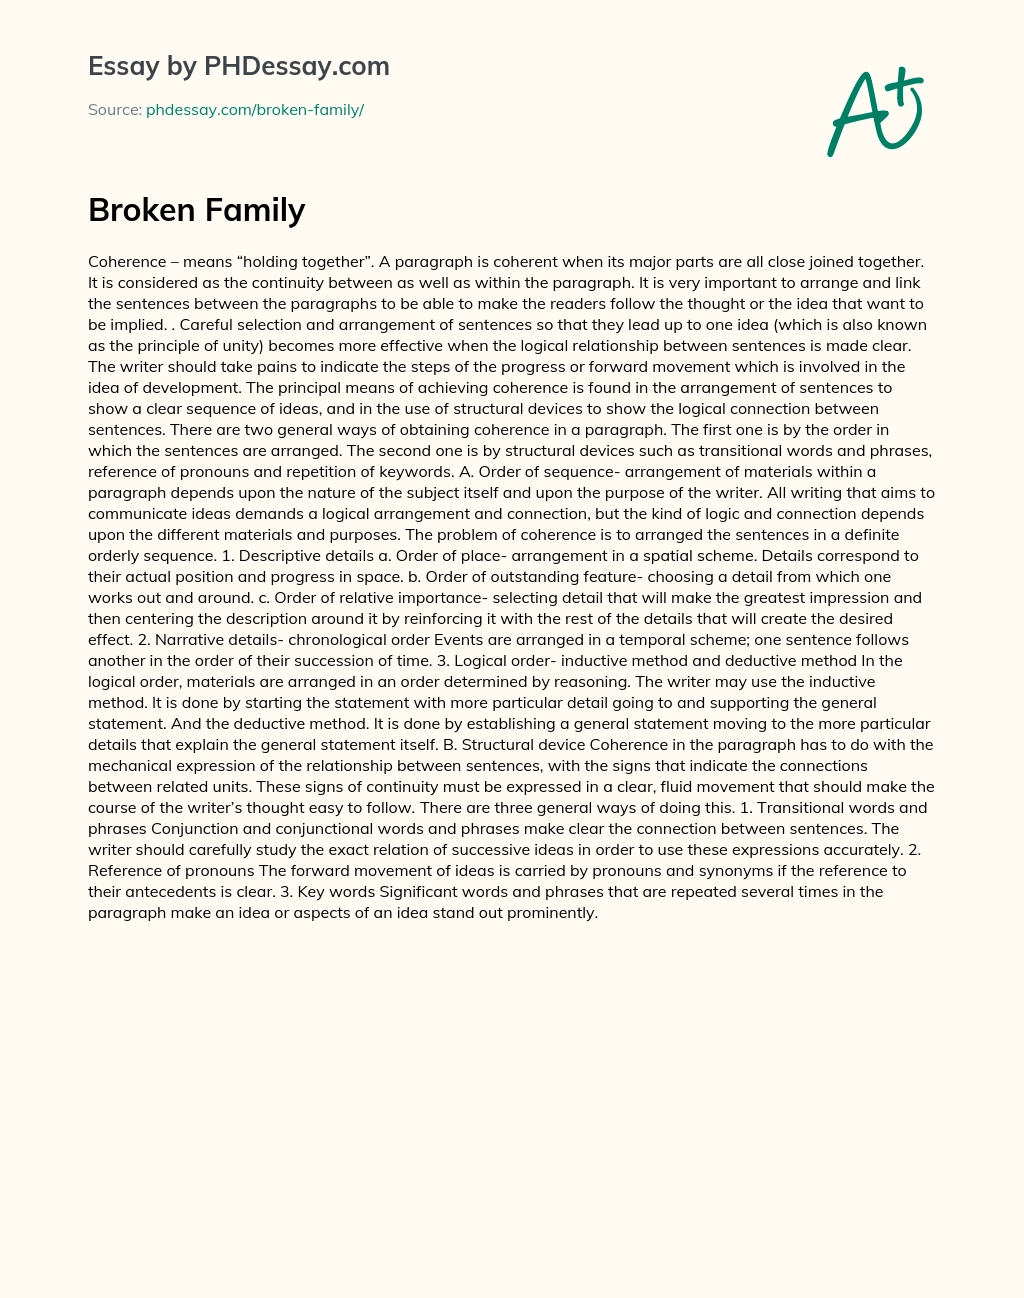 thesis title about broken family